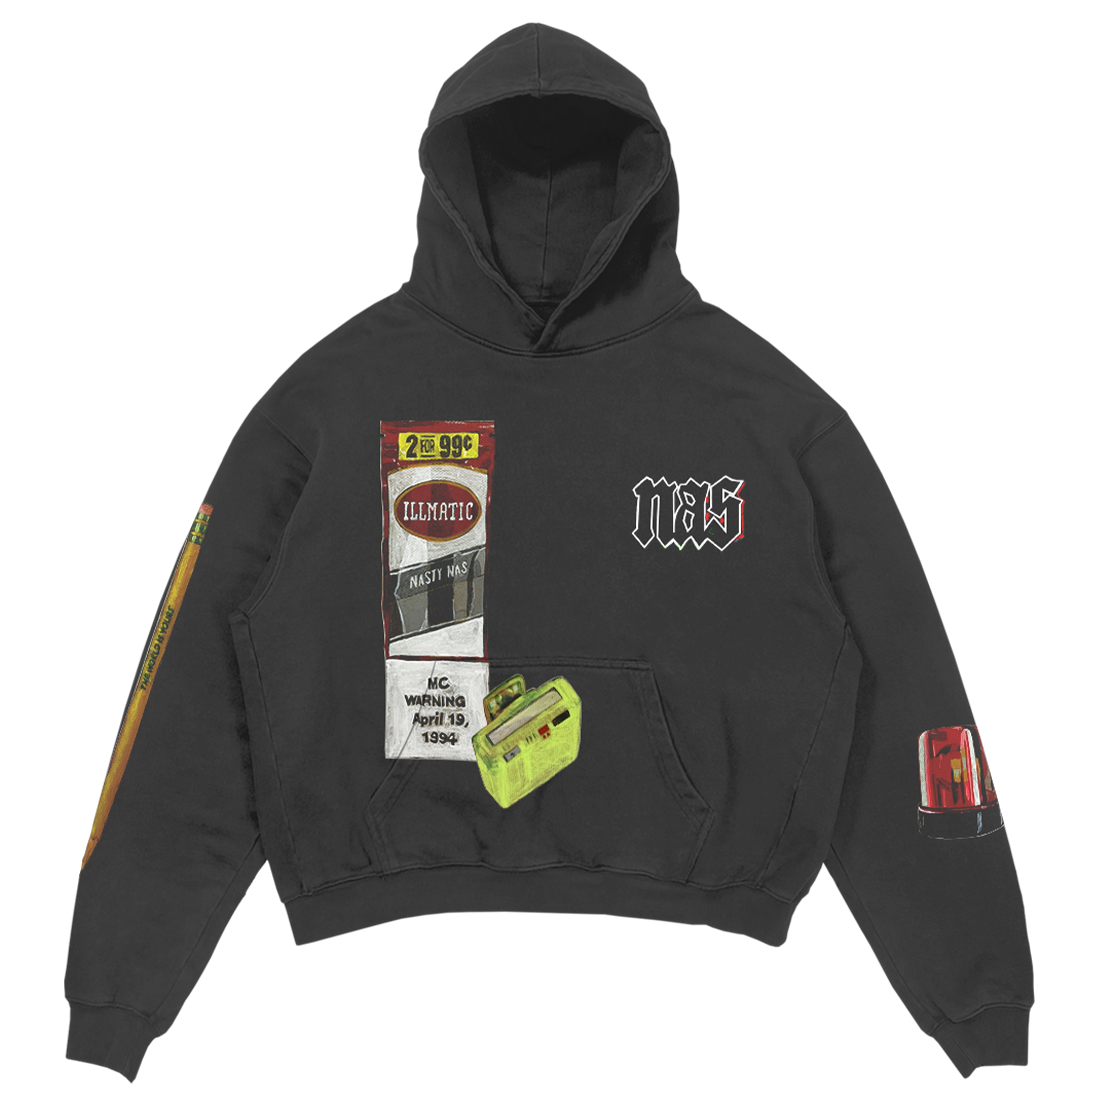 Black hoodie with Nas logo, Illmatic tape graphic, and promotional tape price tag design